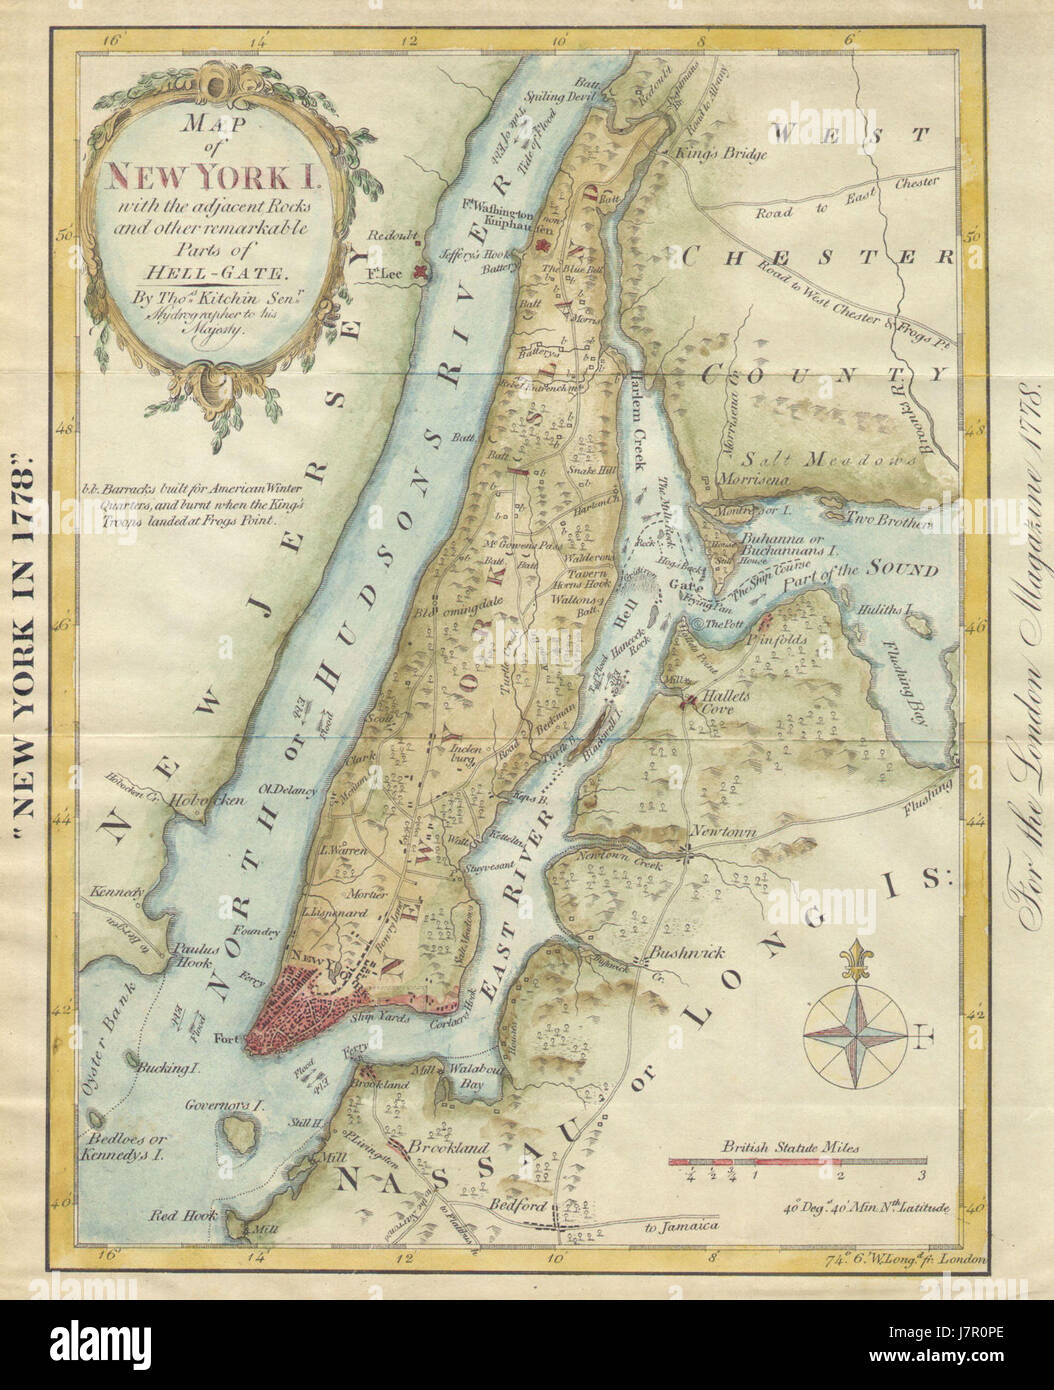 1869 Kitchen   Shannon Map of New York City   Geographicus   NewYorkKitchin mcny 1869 Stock Photo